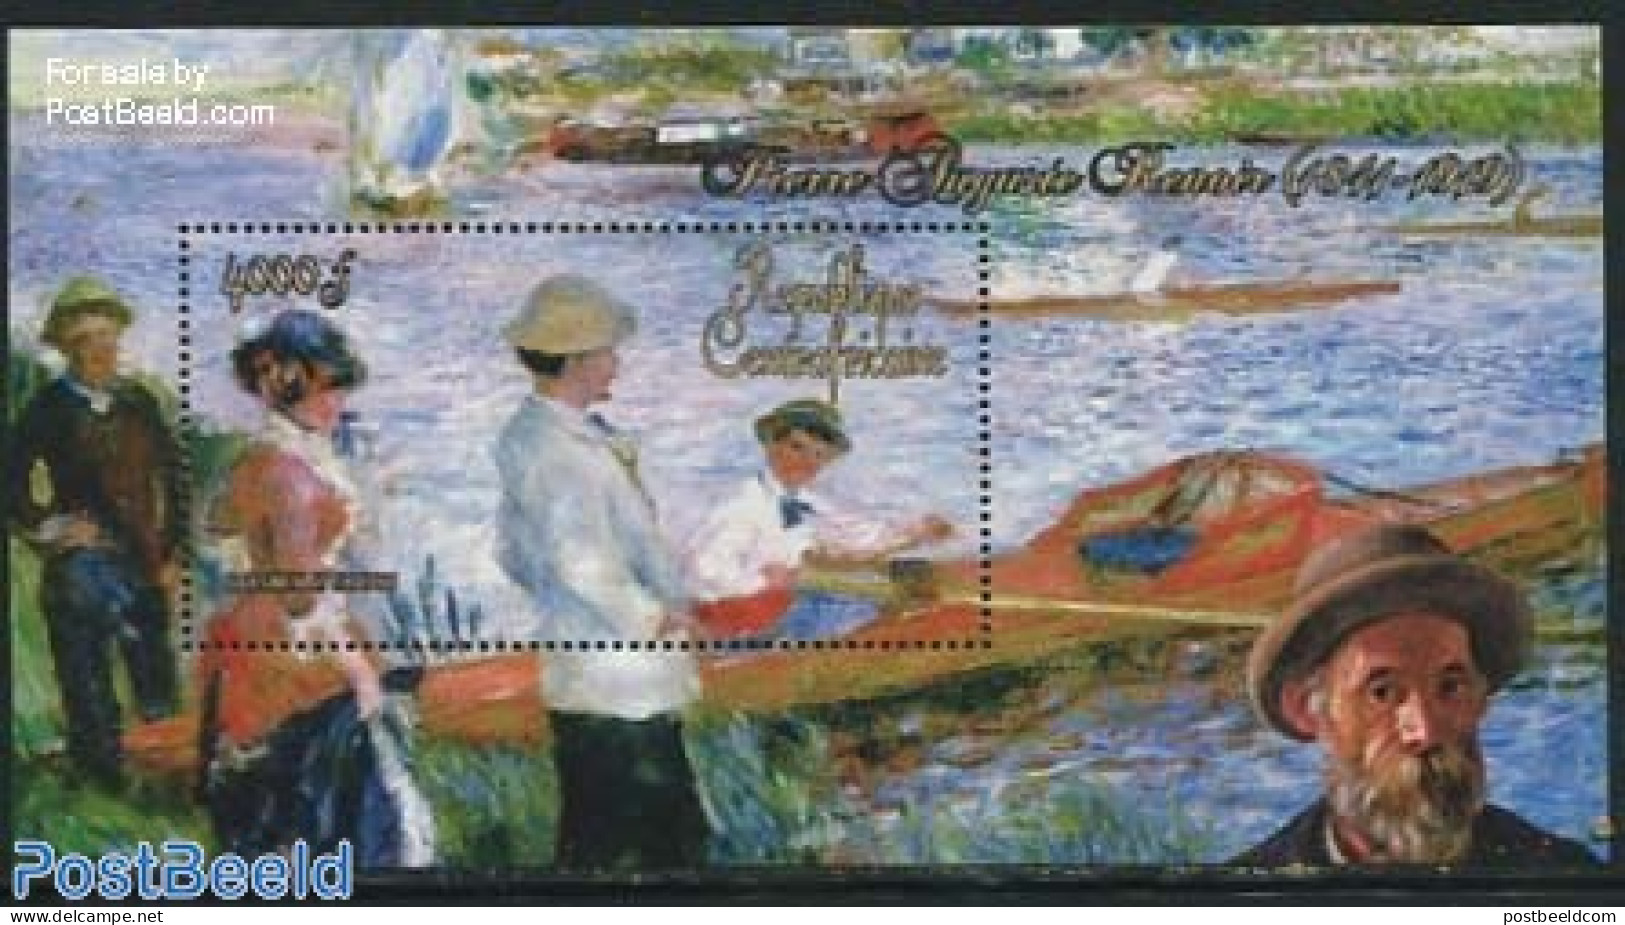 Central Africa 2011 Renoir Painting S/s, Mint NH, Art - Modern Art (1850-present) - Paintings - Repubblica Centroafricana